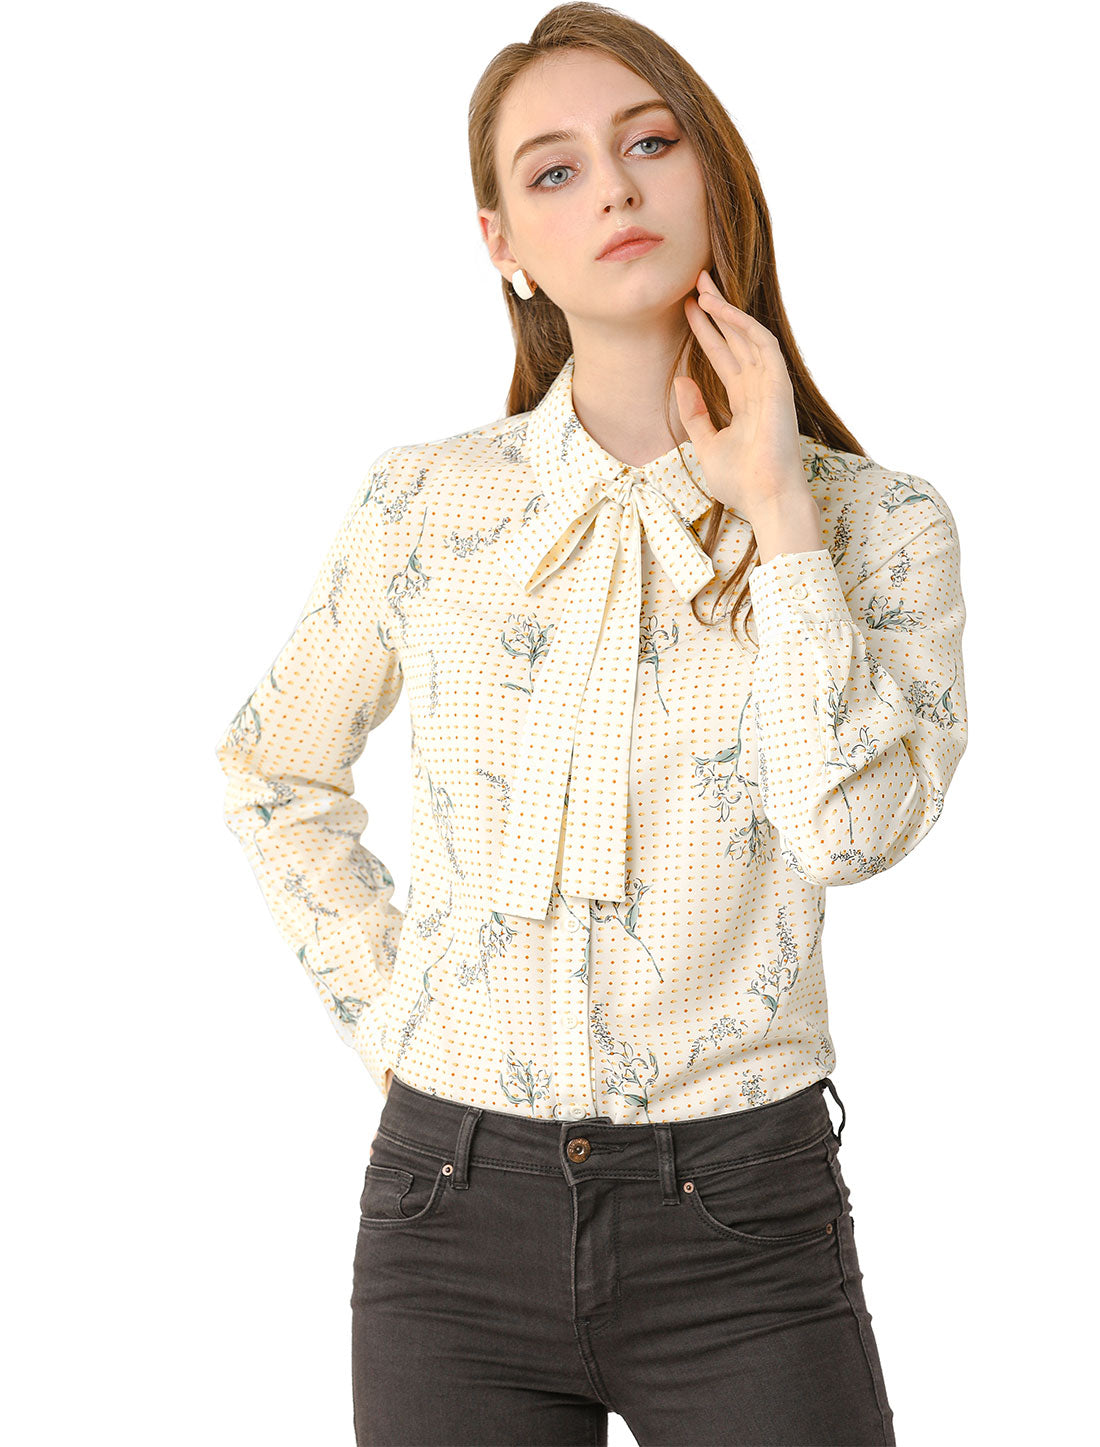 Allegra K Floral Dots Blouse Tie Neck Casual Office Shirt